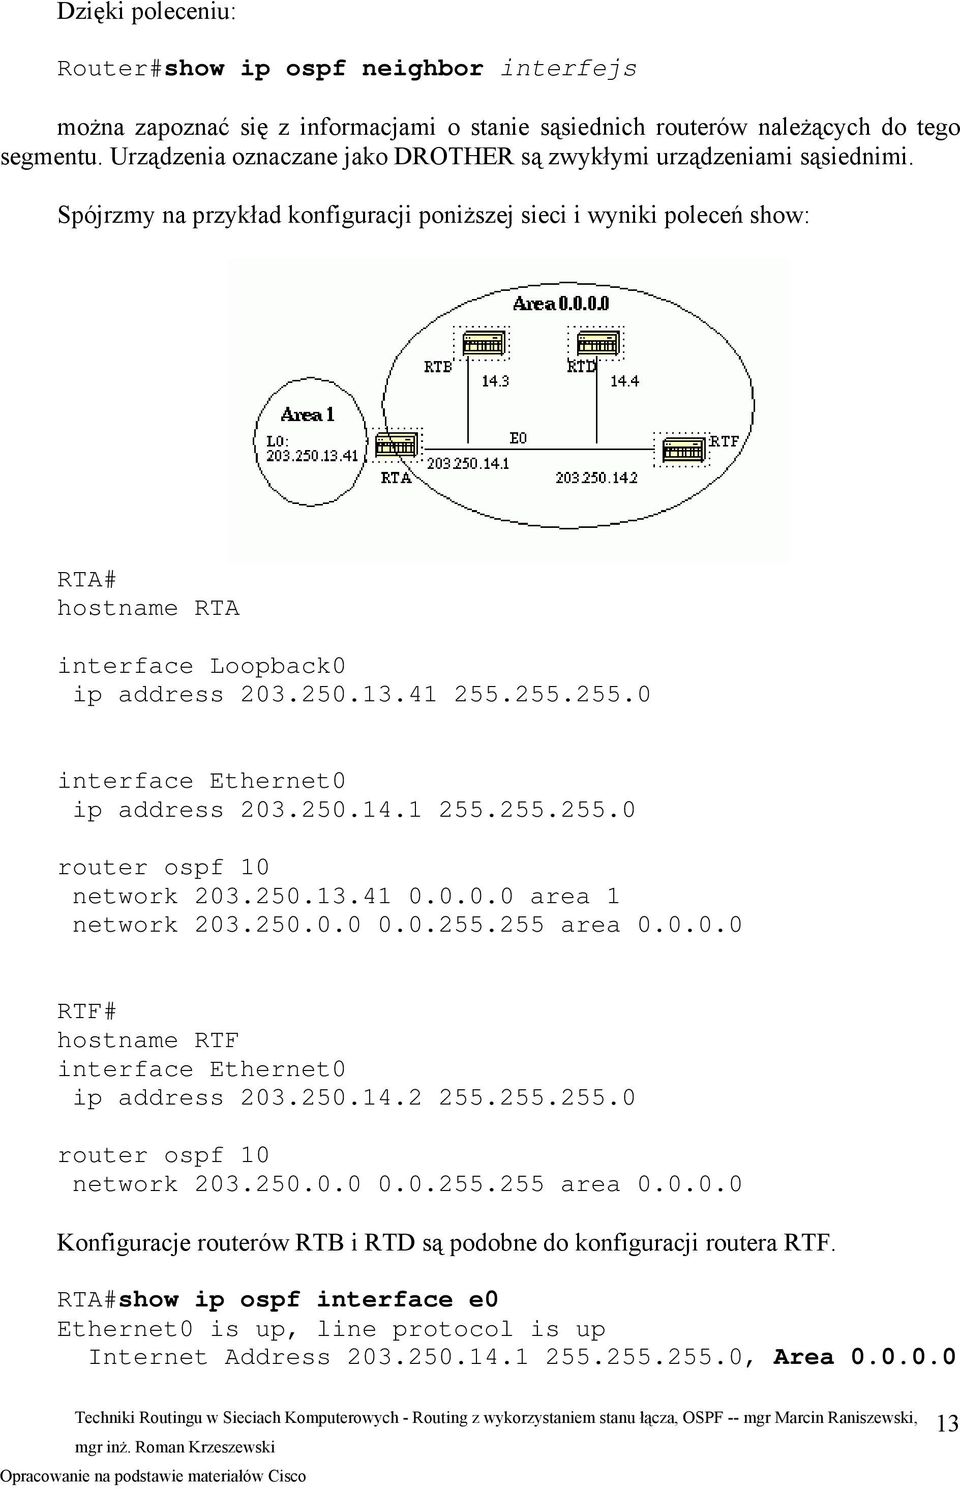 250.13.41 255.255.255.0 interface Ethernet0 ip address 203.250.14.1 255.255.255.0 router ospf 10 network 203.250.13.41 0.0.0.0 area 1 network 203.250.0.0 0.0.255.255 area 0.0.0.0 RTF# hostname RTF interface Ethernet0 ip address 203.